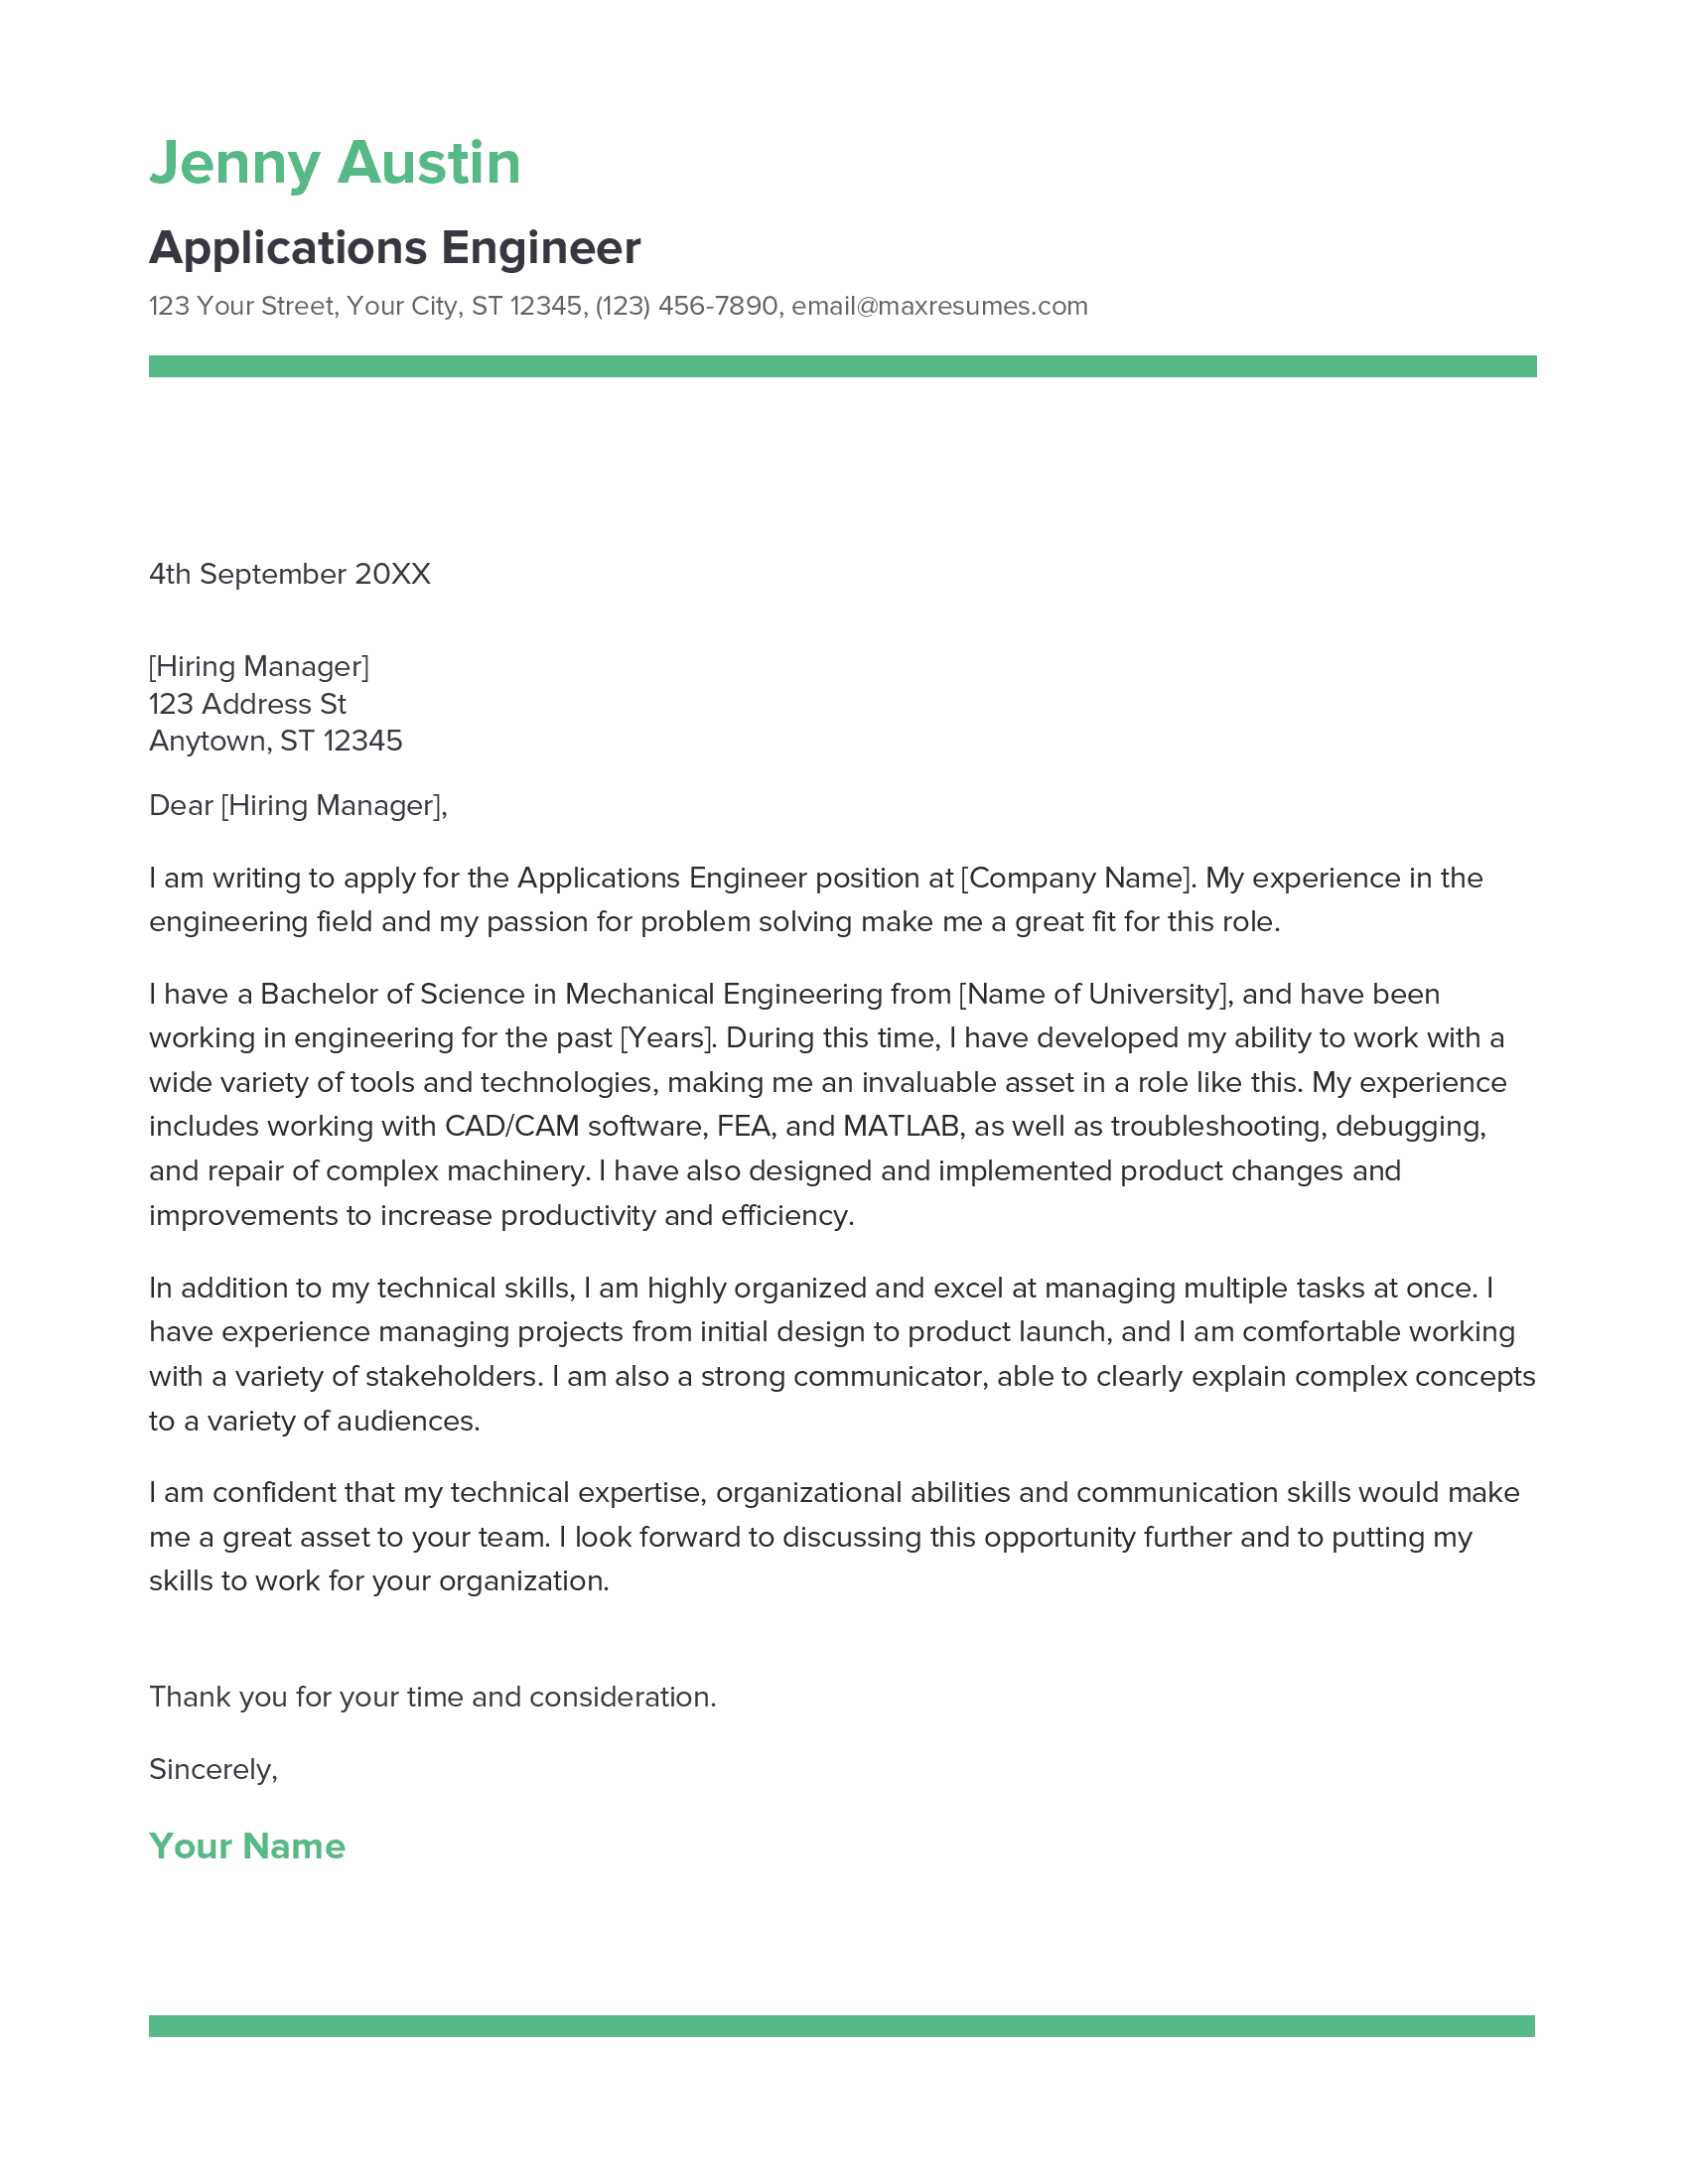 Applications Engineer Cover Letter Example